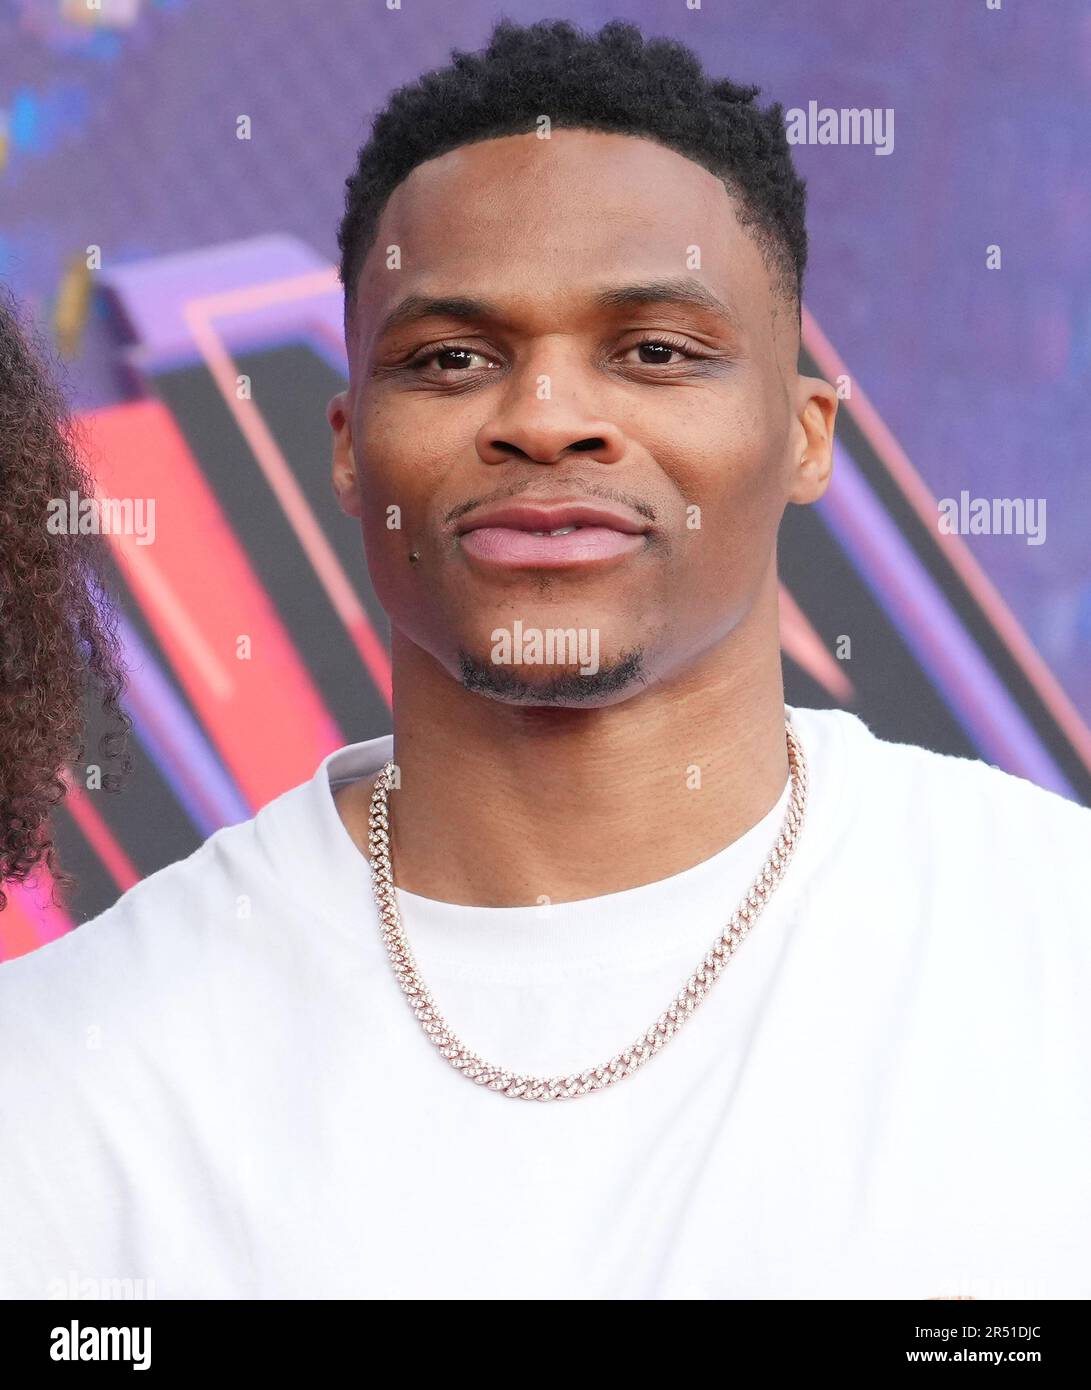 Russell Westbrook Haircut - The Lives of Men